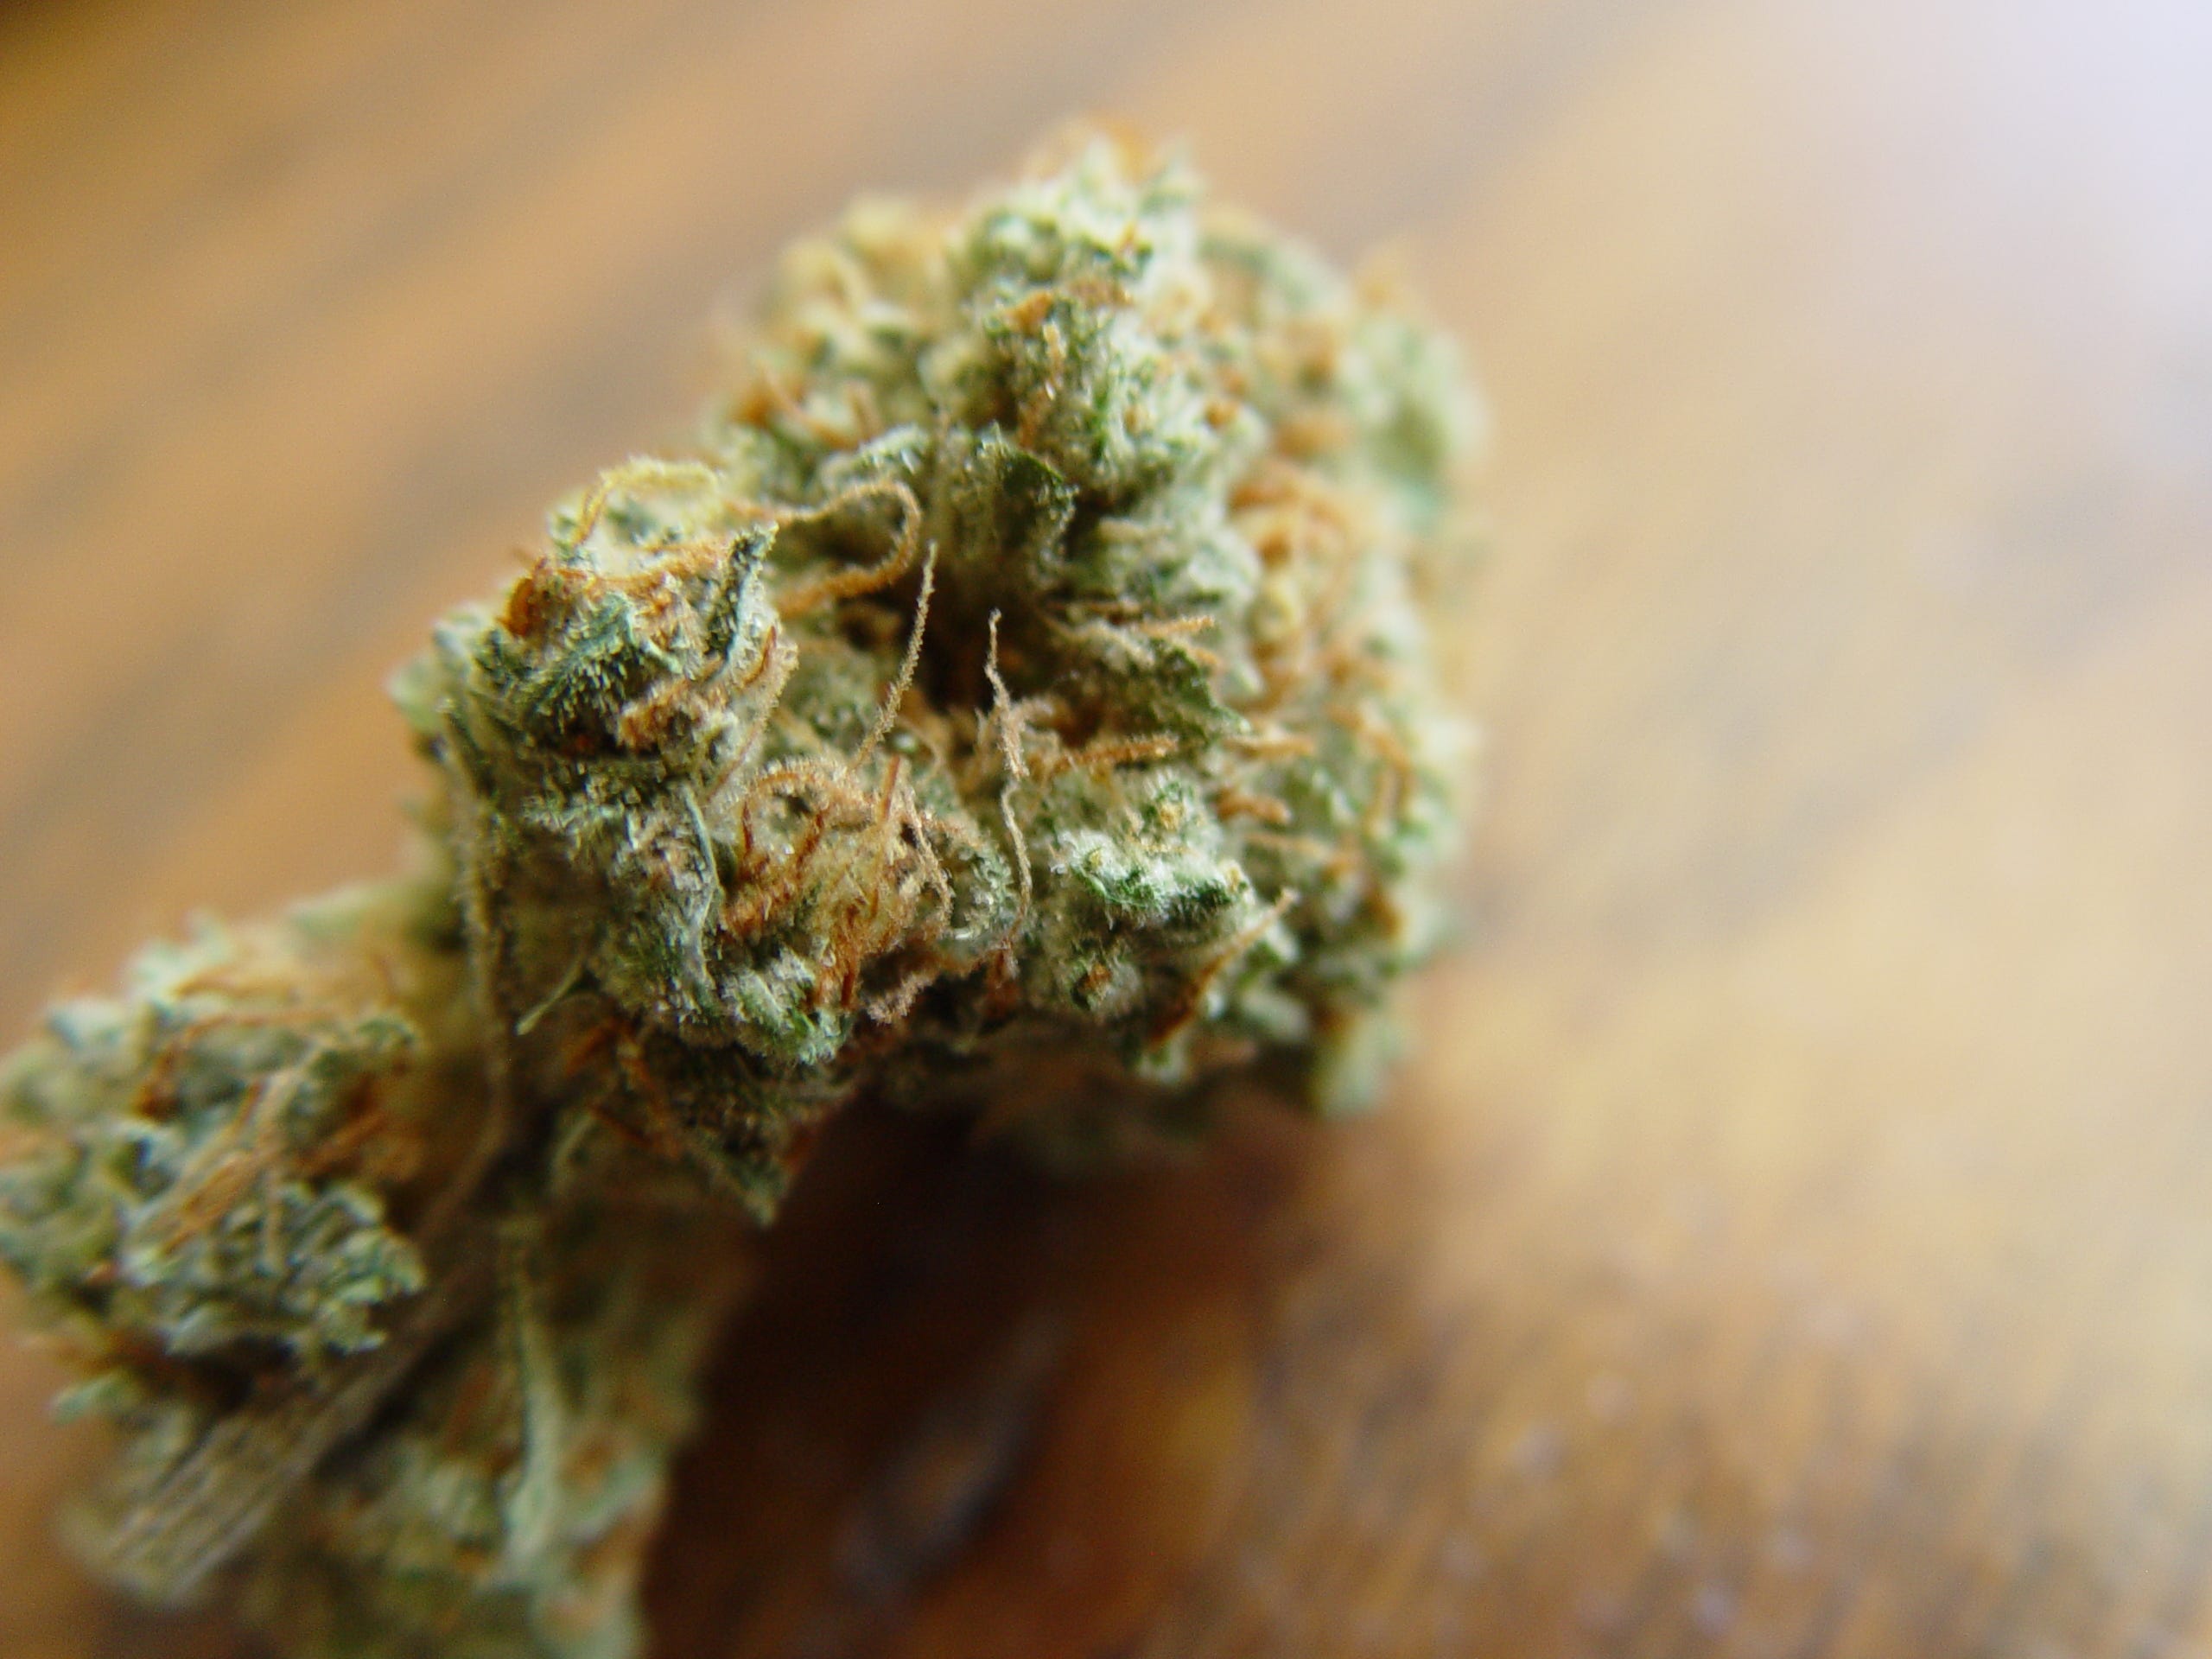 California consumer's guide to retail cannabis: Getting the good weed